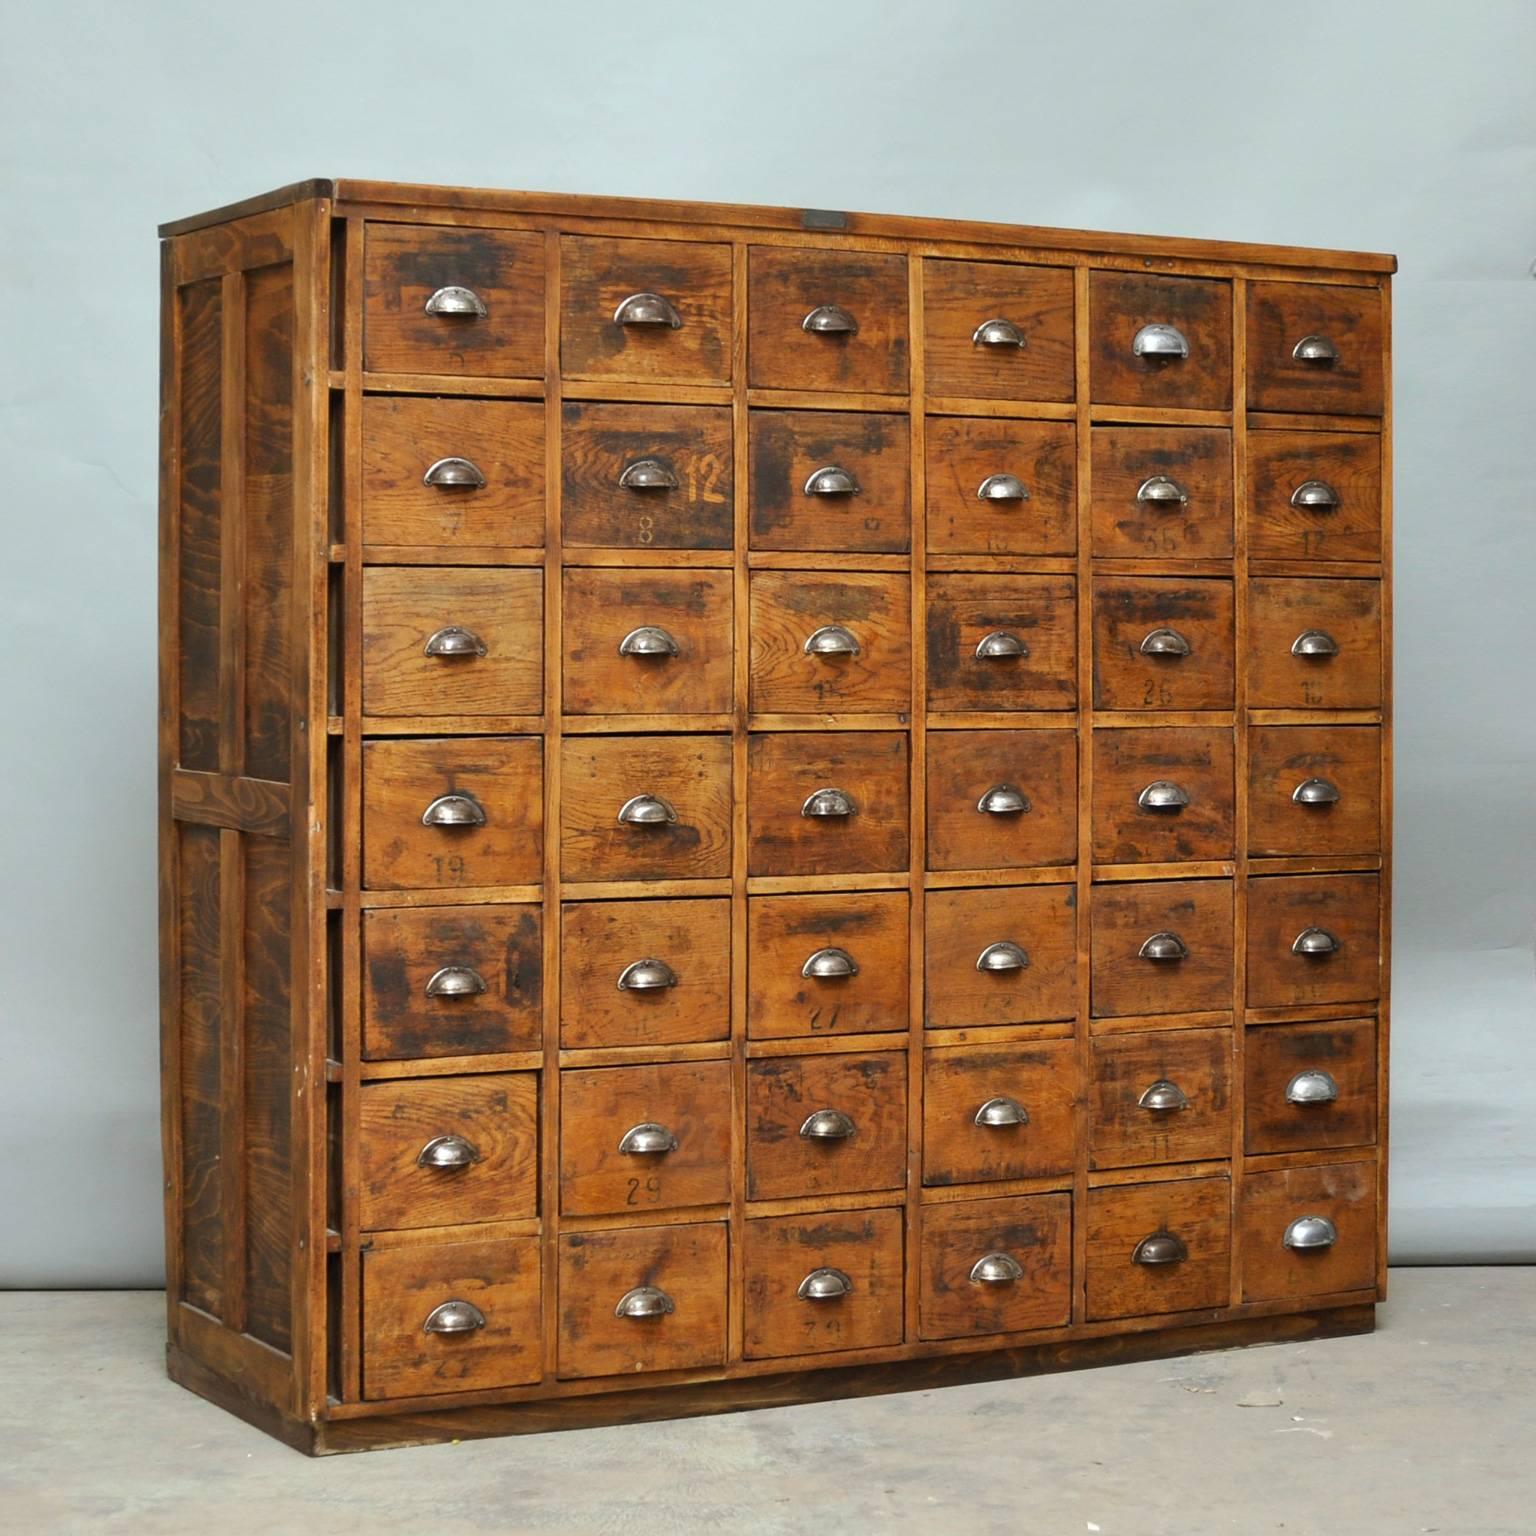 Hungarian Industrial Wood Tool Cabinet